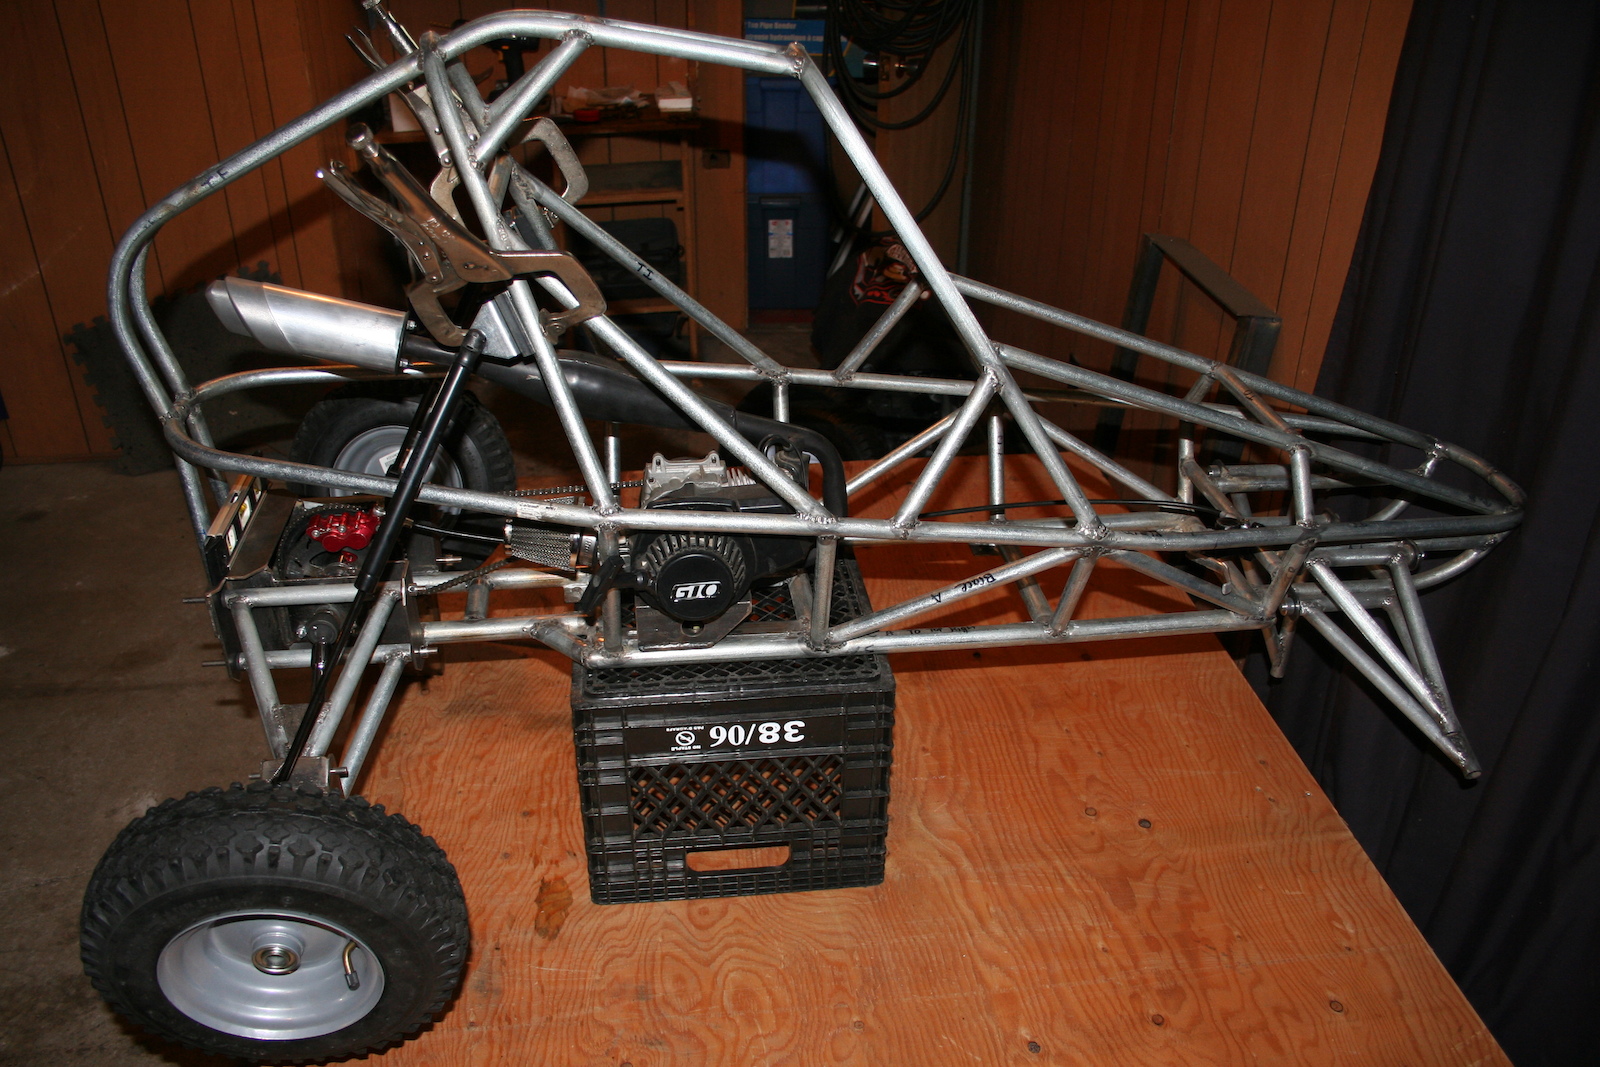 My winter project.  A half scale remote controll dune buggy.  50cc engine.  Now it is summer I am too busy riding my bike to finish this project for now.